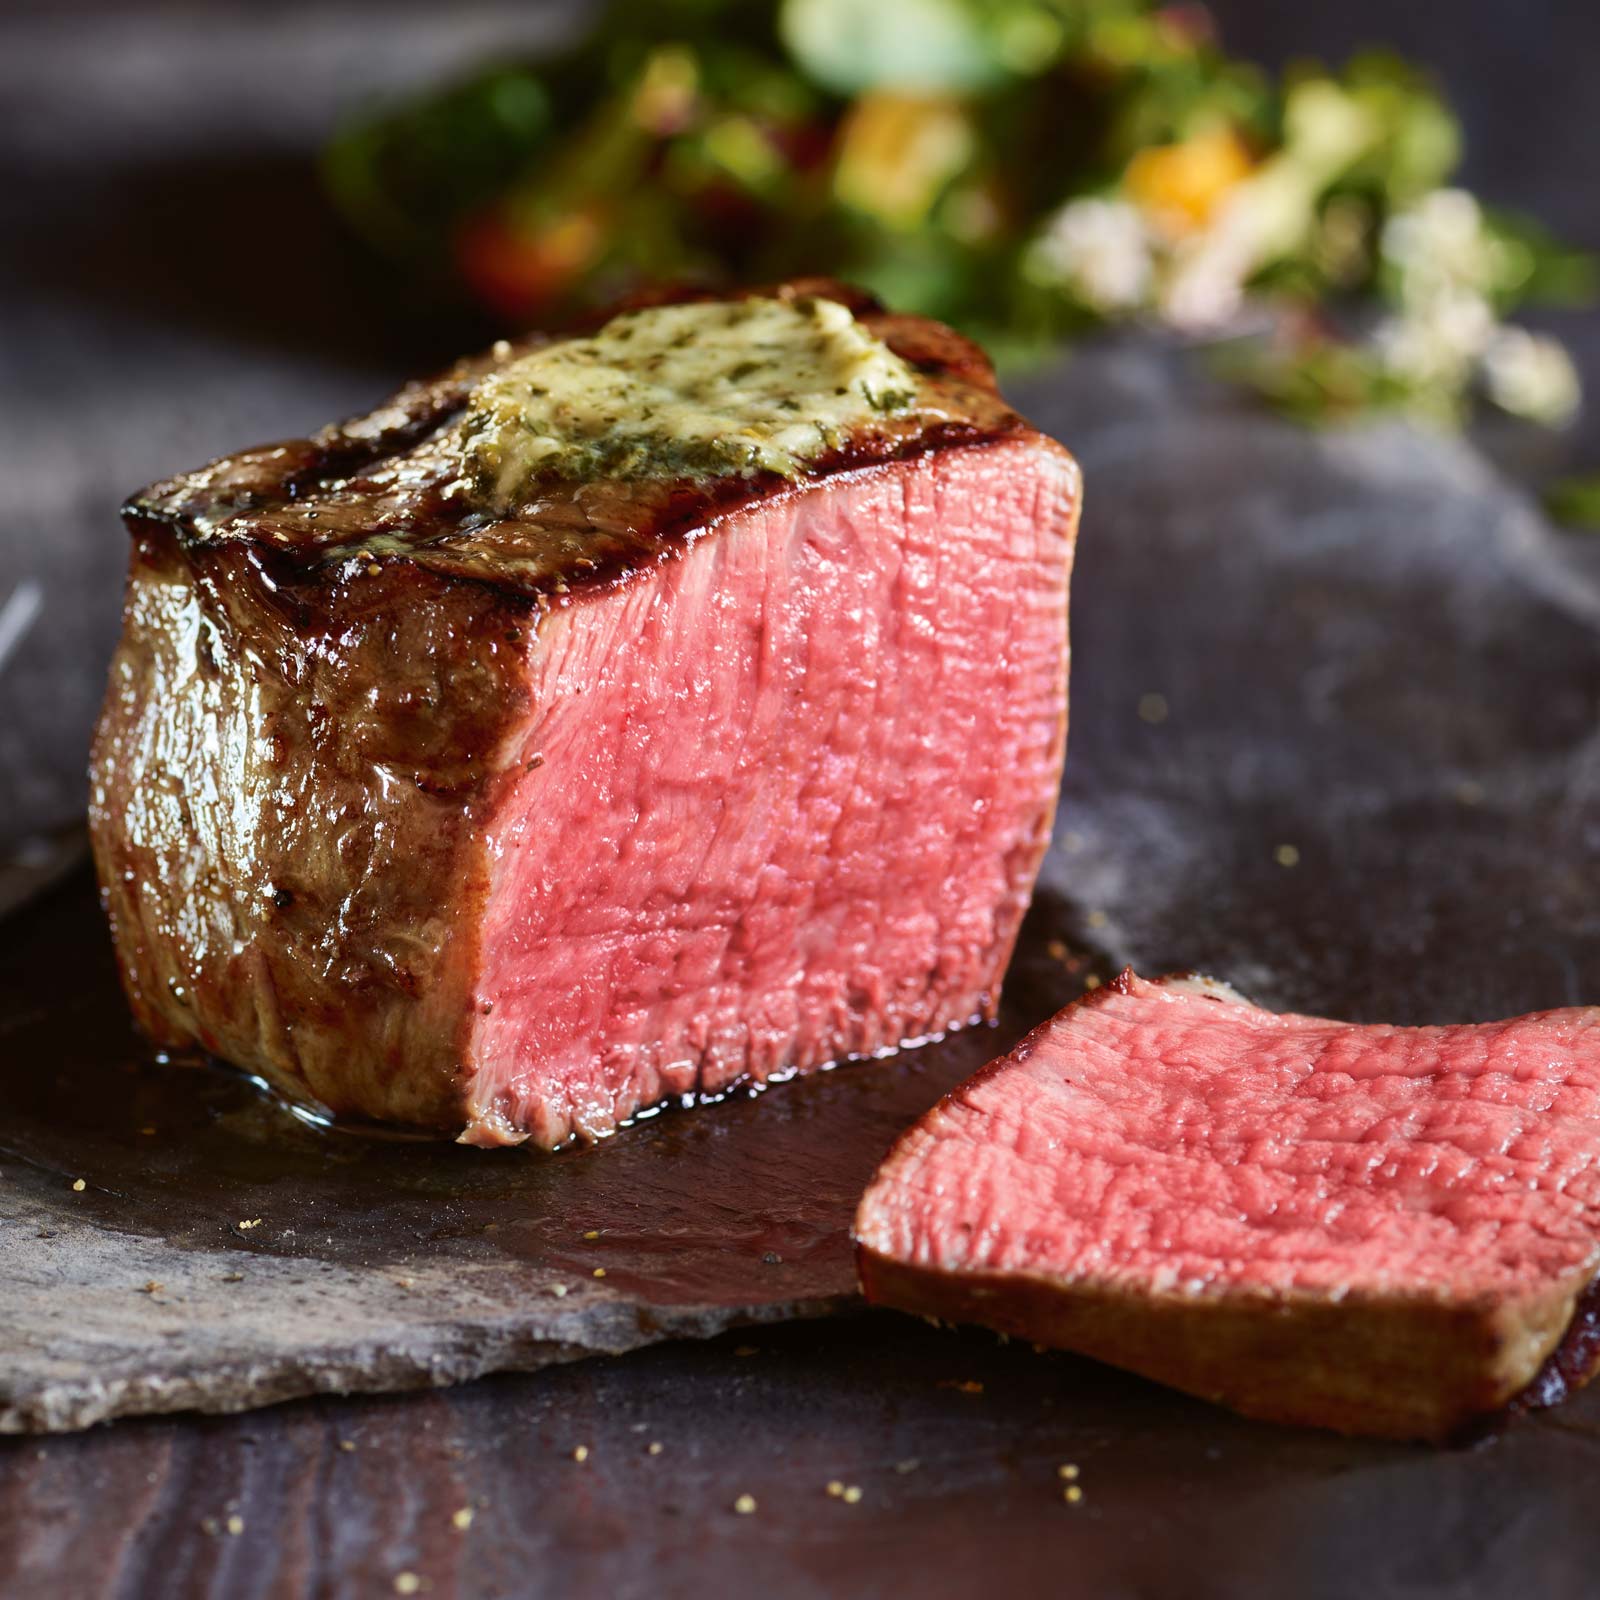 Your Mother’s Day Guide to Recipes, Steaks and More